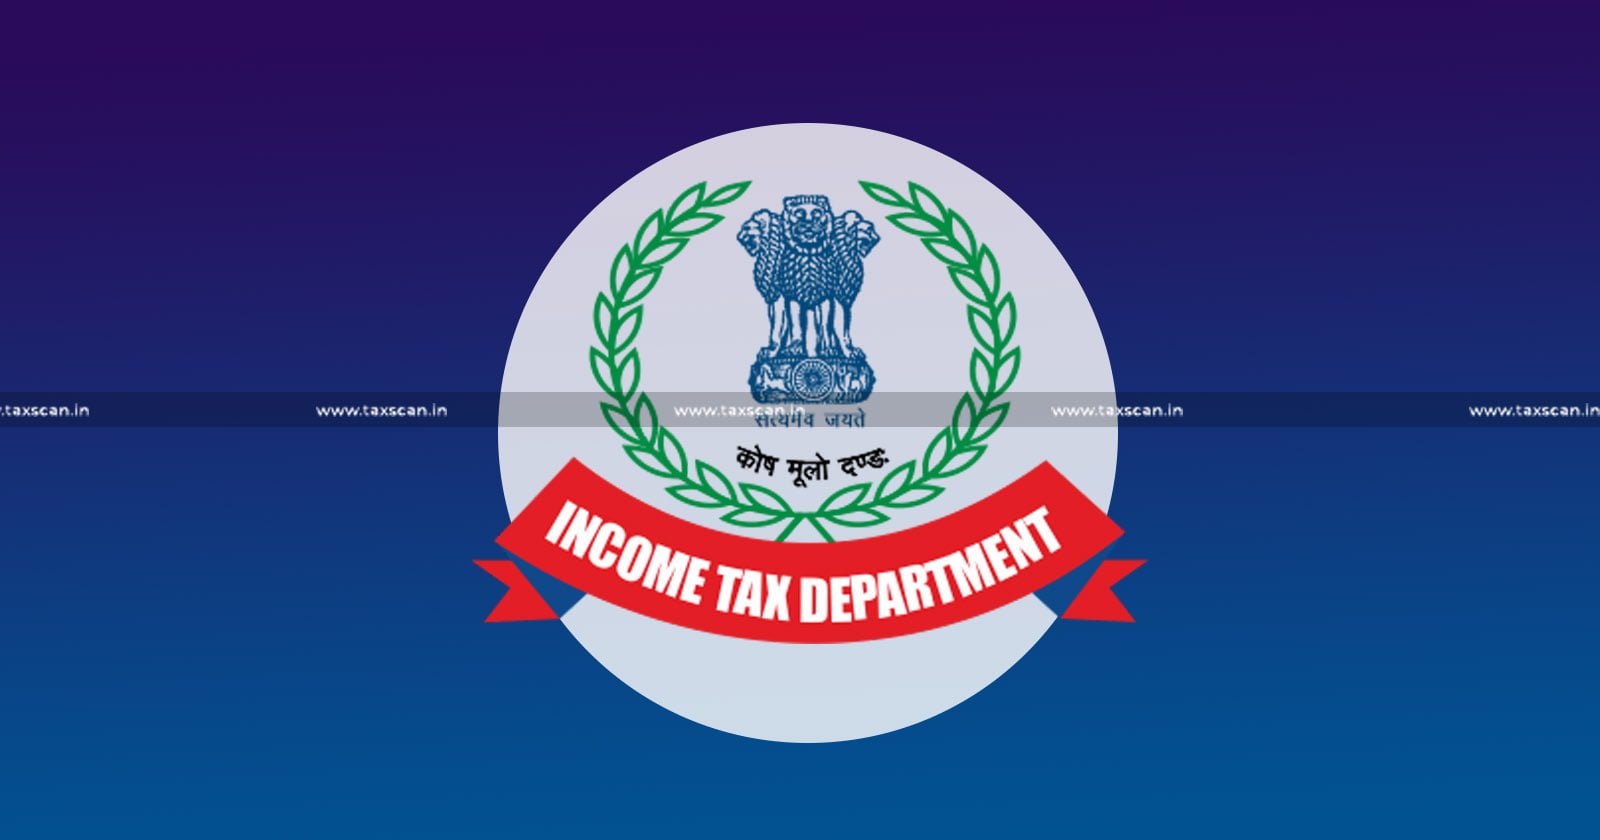 Tax Department - Tax paid - Assessee - Credit of Tax Deducted - Tax Deducted - ITAT - Taxscan